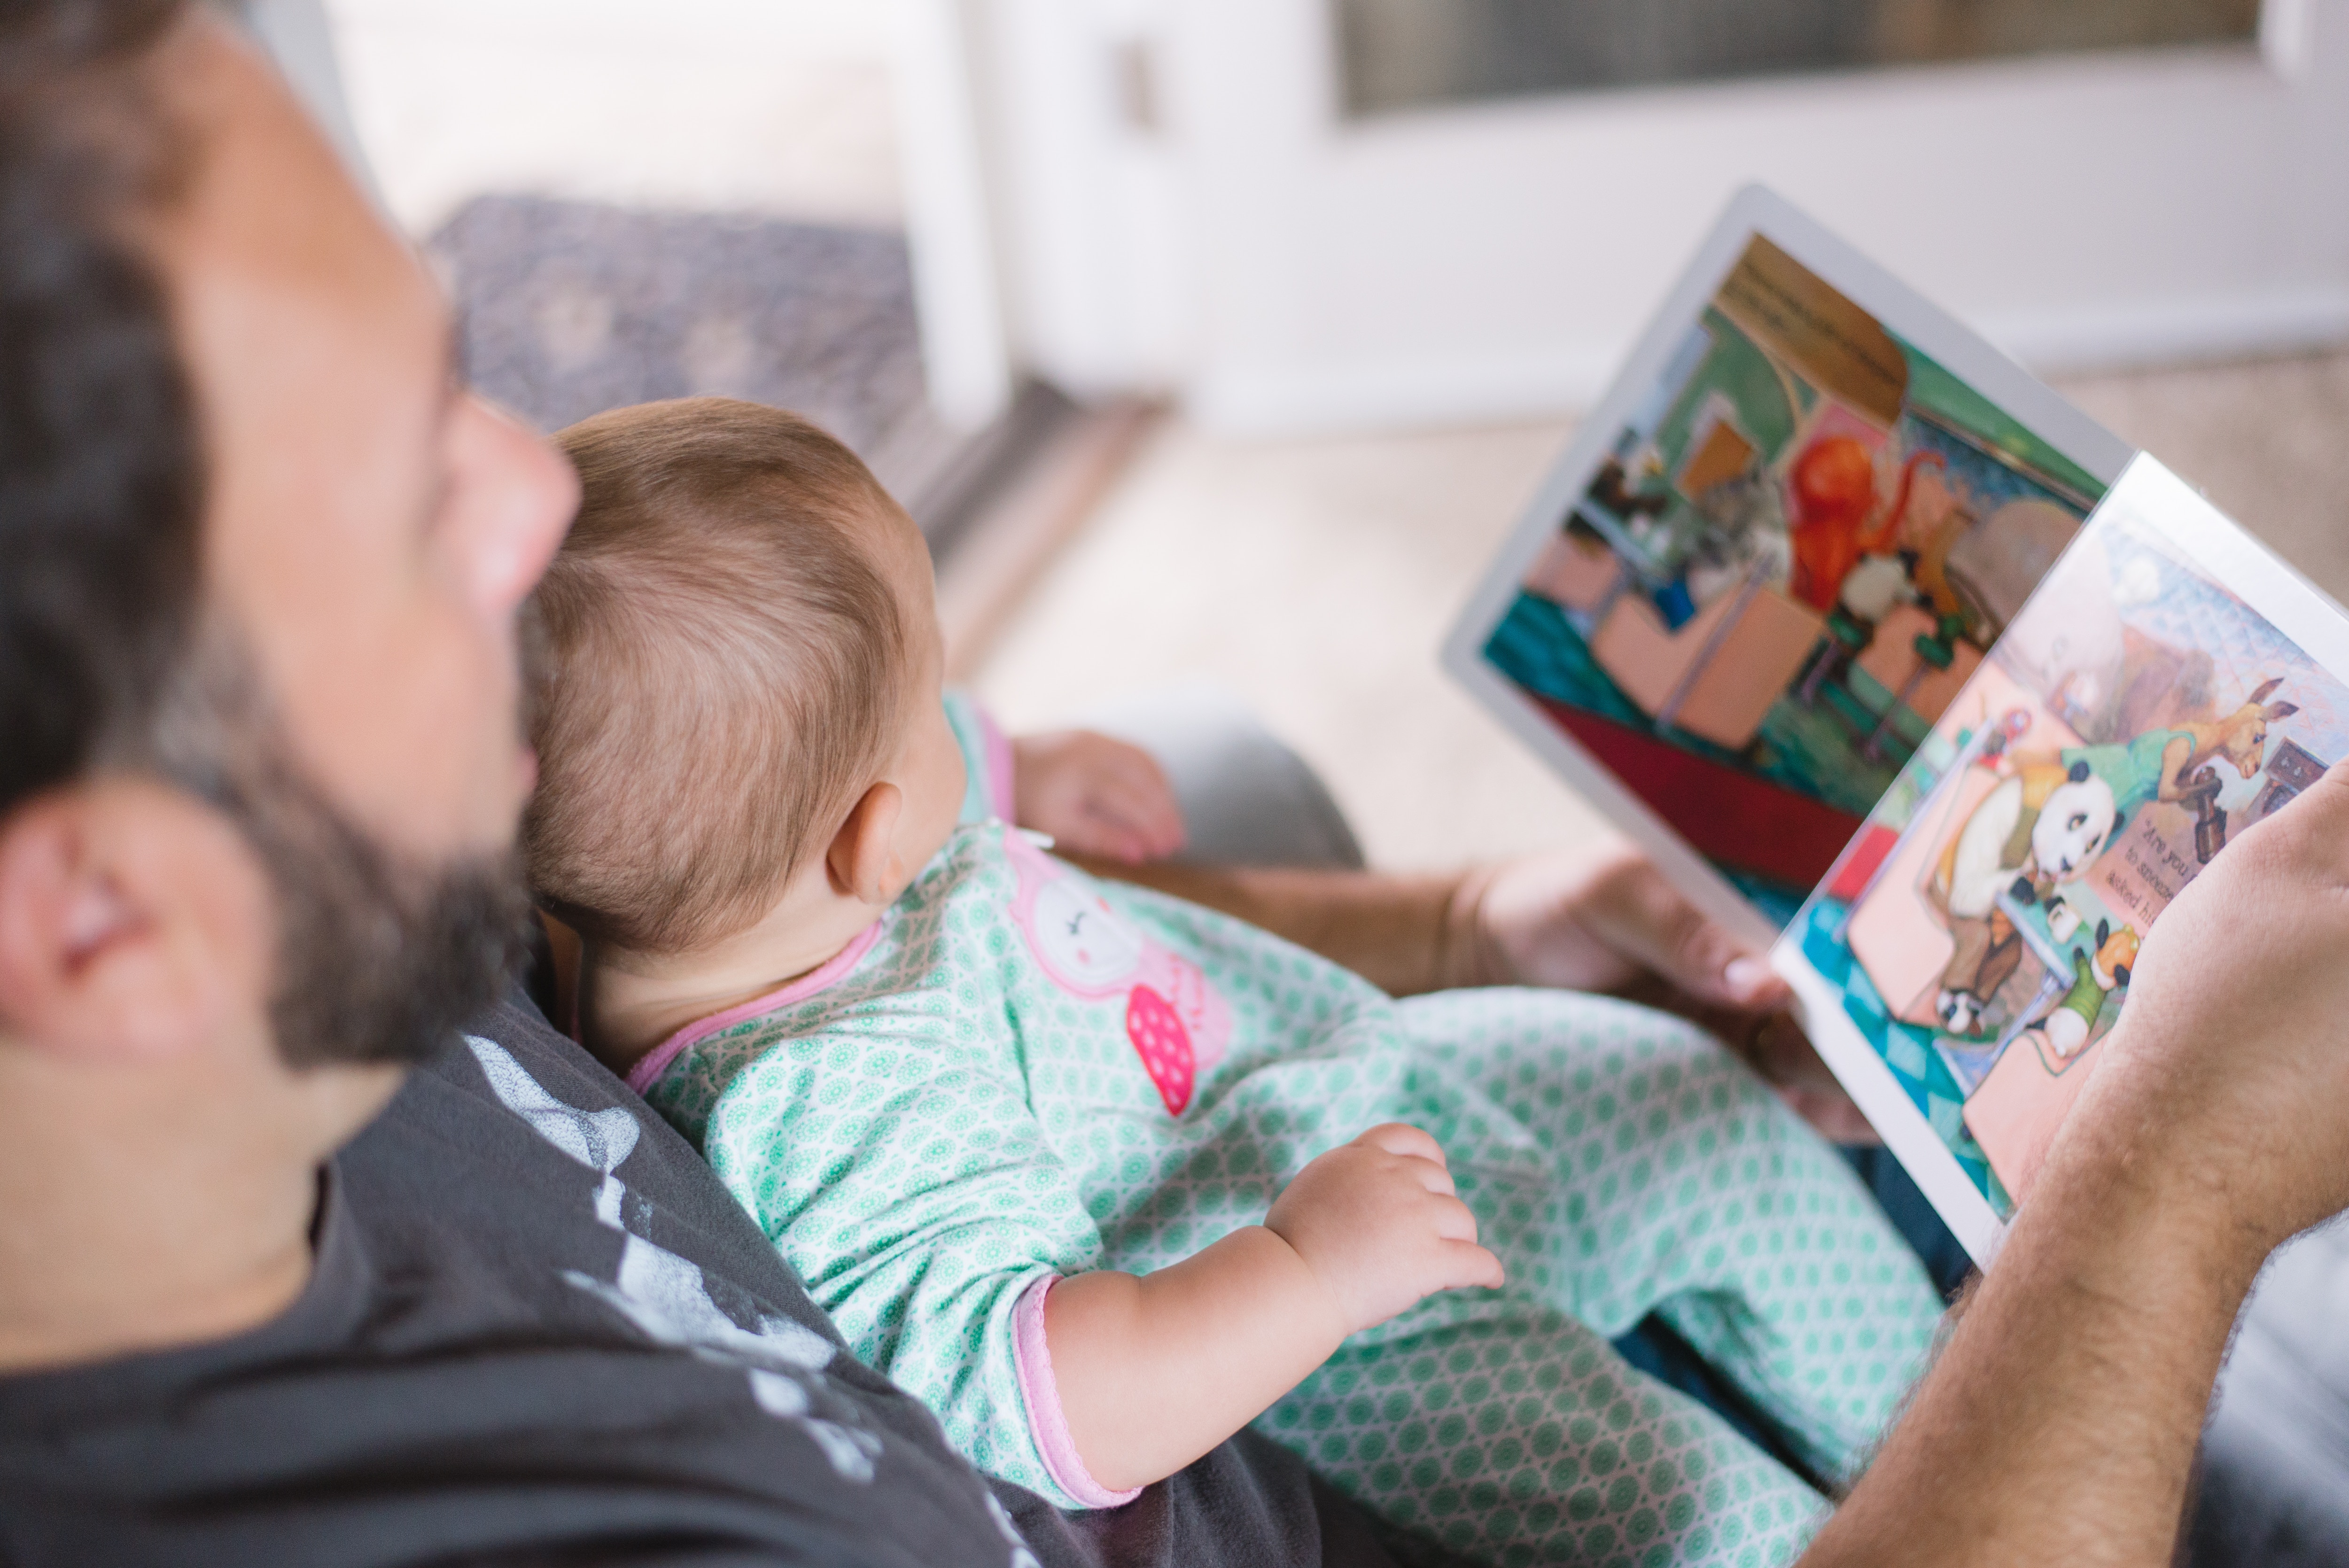 A father sat with his baby on his lap reading a story book